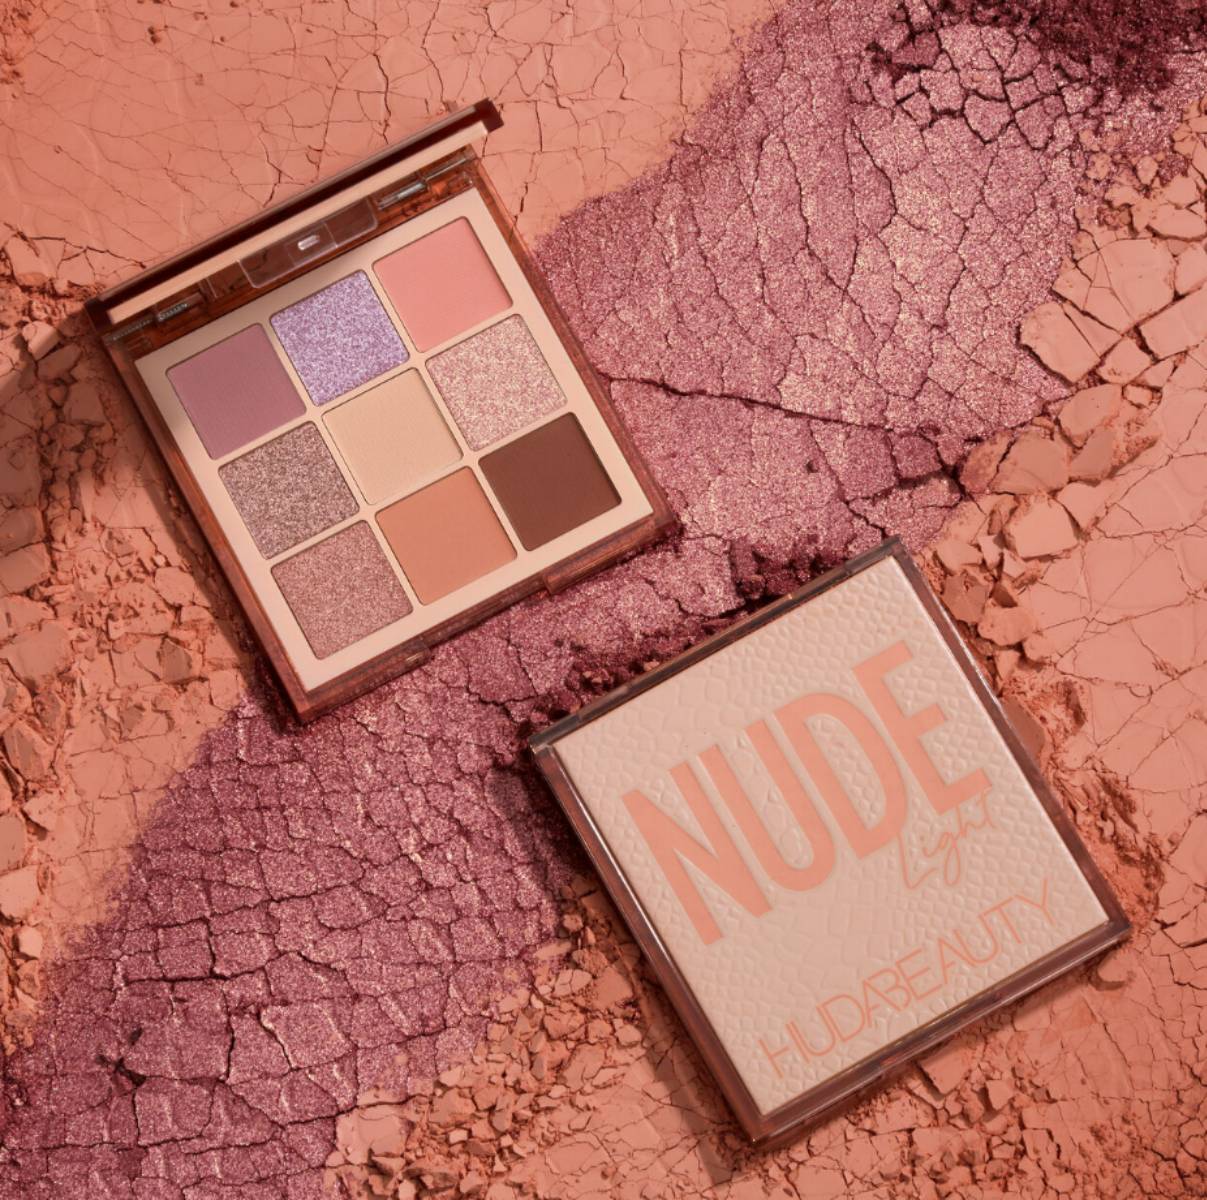 ICYMI: Cult-Fave Makeup Brand Huda Beauty Is on Lazada